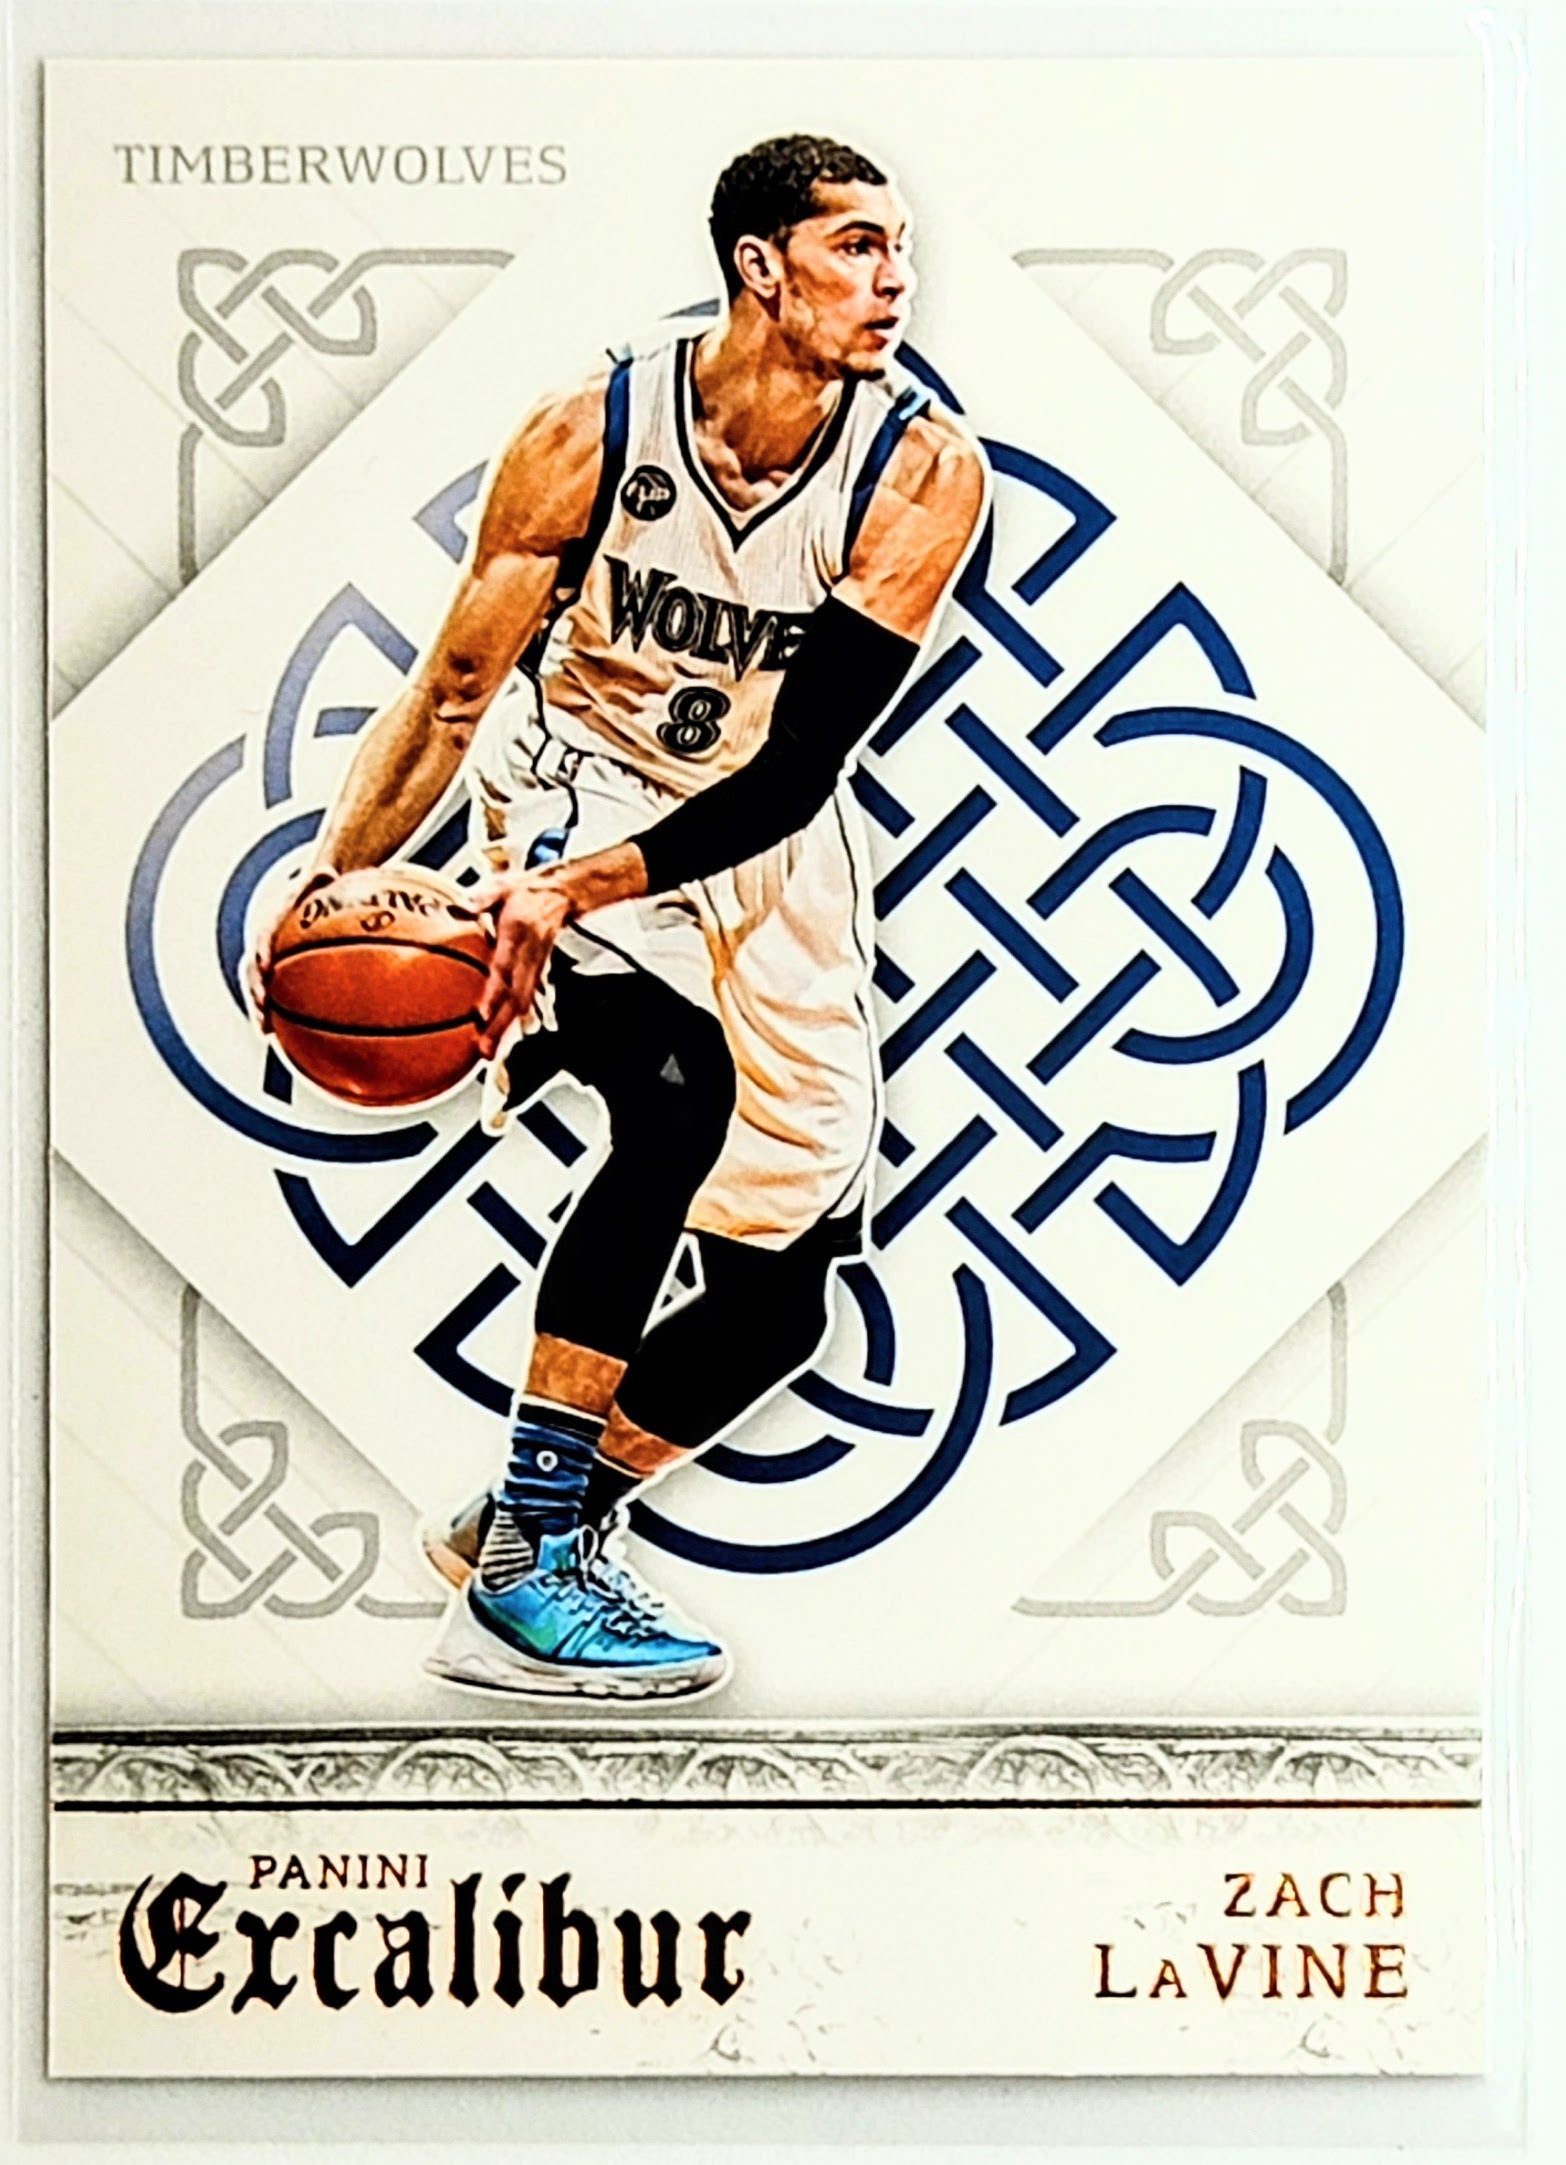 2015 Panini Excalibur Zach
LaVine Minnesota Timberwolves
  Basketball Card TH1C4 simple Xclusive Collectibles   